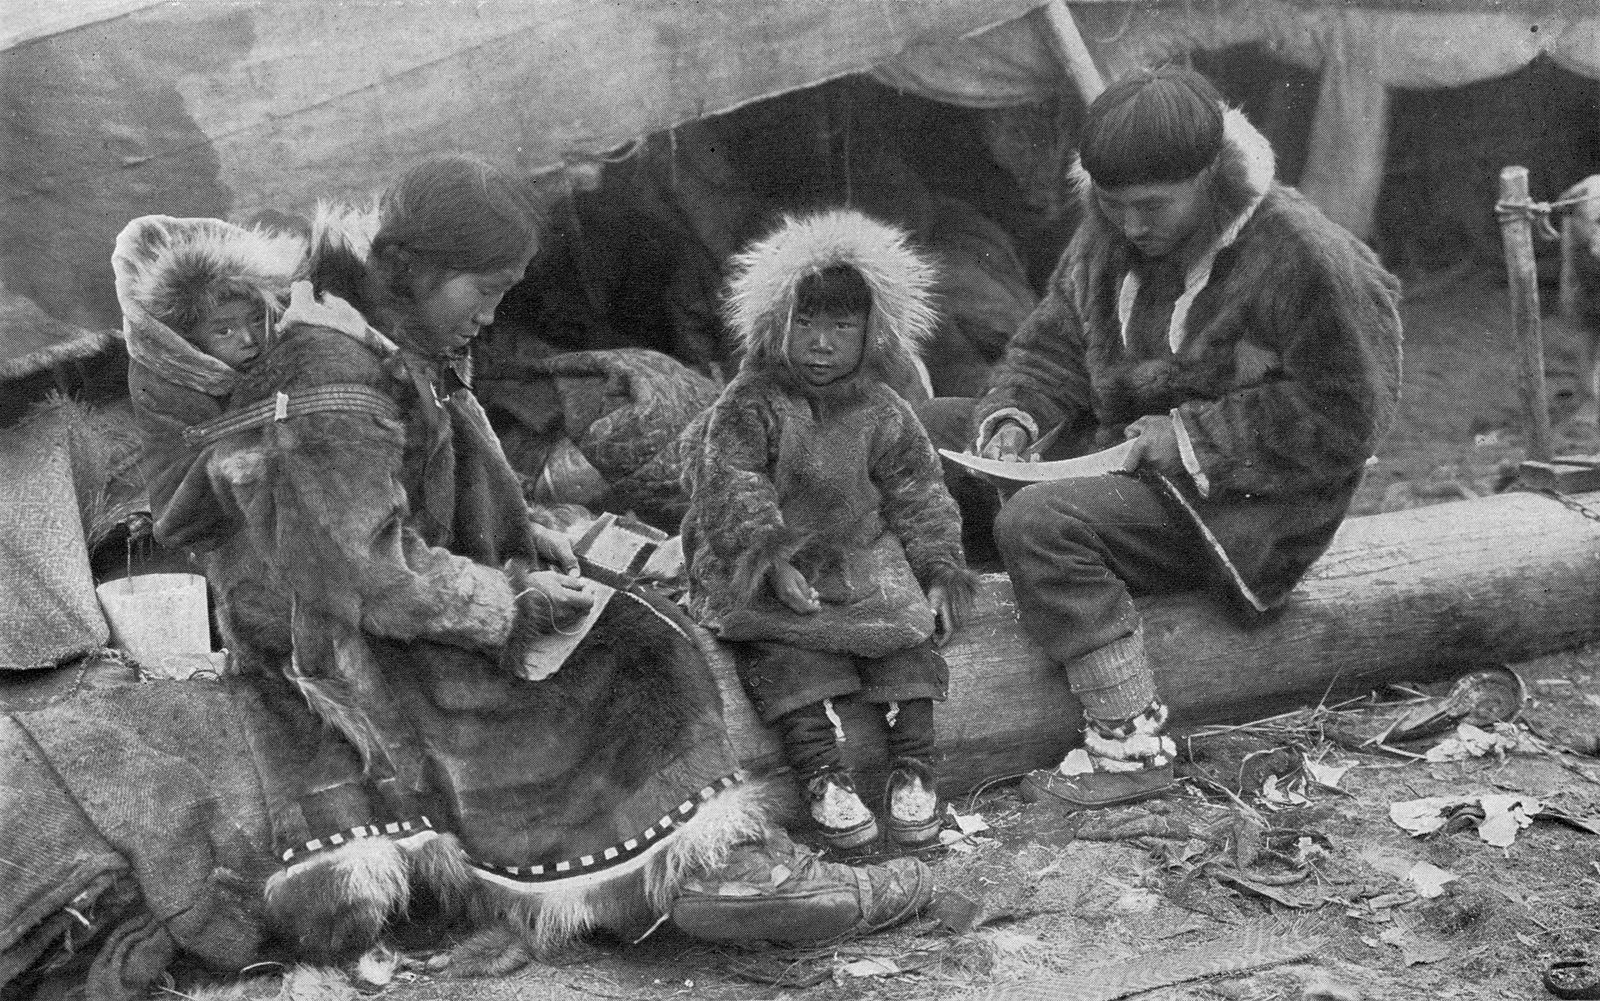 Black and white photograph of traditional inuit sitting on a log